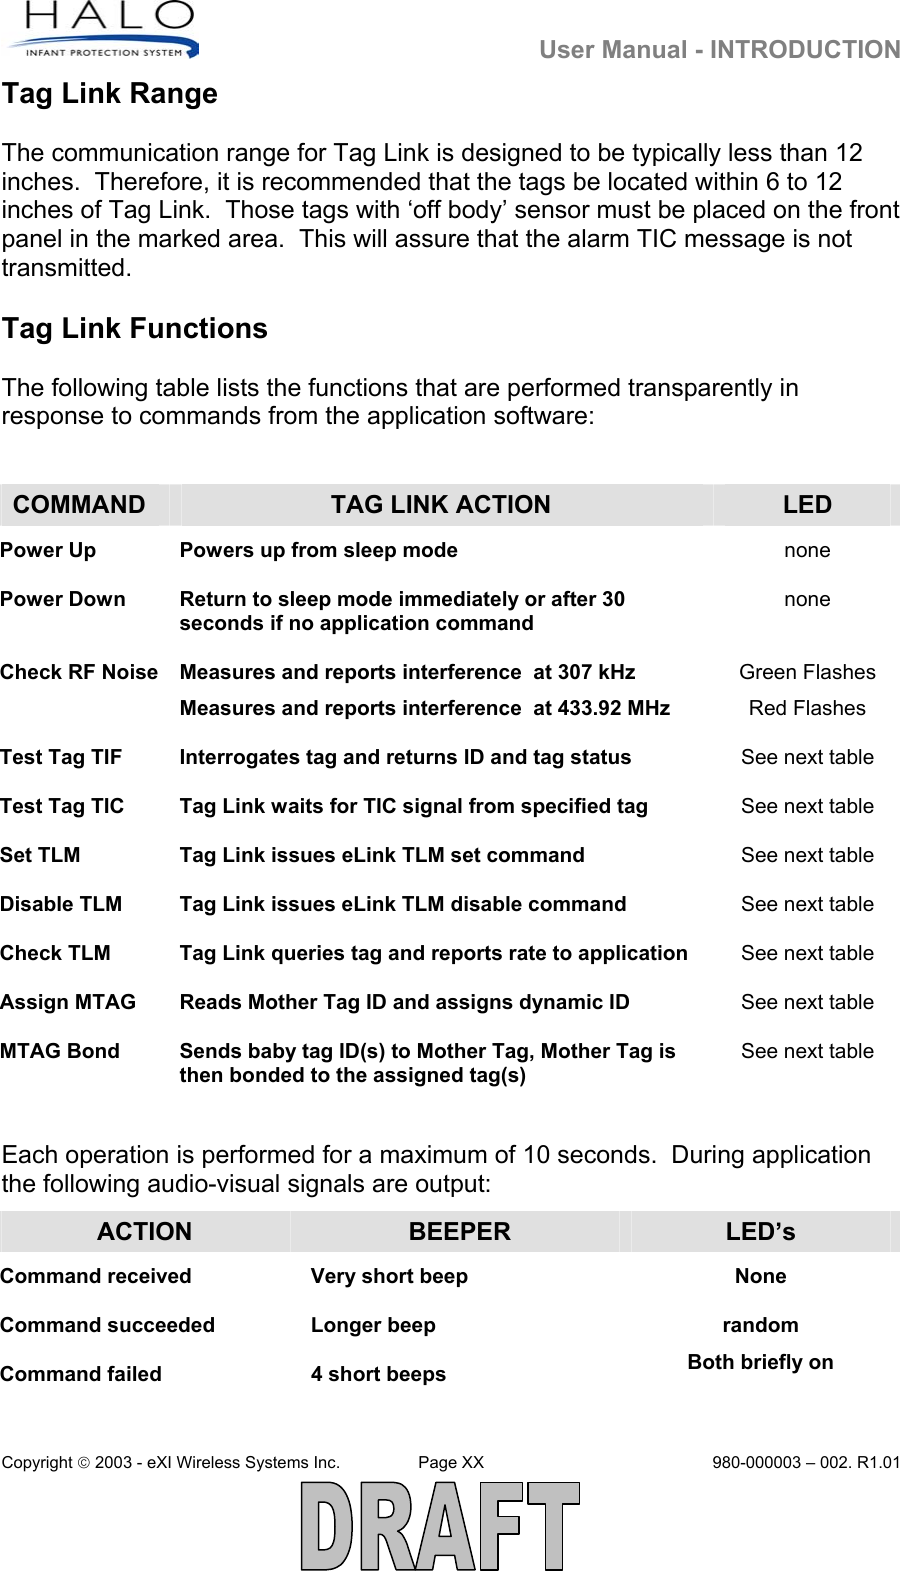   User Manual - INTRODUCTION Copyright  2003 - eXI Wireless Systems Inc.  Page XX  980-000003 – 002. R1.01  Tag Link Range  The communication range for Tag Link is designed to be typically less than 12 inches.  Therefore, it is recommended that the tags be located within 6 to 12 inches of Tag Link.  Those tags with ‘off body’ sensor must be placed on the front panel in the marked area.  This will assure that the alarm TIC message is not transmitted.    Tag Link Functions  The following table lists the functions that are performed transparently in response to commands from the application software:  COMMAND  TAG LINK ACTION  LED Power Up  Powers up from sleep mode none Power Down  Return to sleep mode immediately or after 30 seconds if no application command none Check RF Noise  Measures and reports interference  at 307 kHz Measures and reports interference  at 433.92 MHz Green Flashes Red Flashes Test Tag TIF  Interrogates tag and returns ID and tag status See next table Test Tag TIC Tag Link waits for TIC signal from specified tag See next table Set TLM  Tag Link issues eLink TLM set command  See next table Disable TLM  Tag Link issues eLink TLM disable command  See next table Check TLM  Tag Link queries tag and reports rate to application   See next table Assign MTAG  Reads Mother Tag ID and assigns dynamic ID  See next table MTAG Bond  Sends baby tag ID(s) to Mother Tag, Mother Tag is then bonded to the assigned tag(s) See next table  Each operation is performed for a maximum of 10 seconds.  During application the following audio-visual signals are output: ACTION  BEEPER  LED’s Command received  Very short beep  None Command succeeded  Longer beep  random Command failed  4 short beeps  Both briefly on 